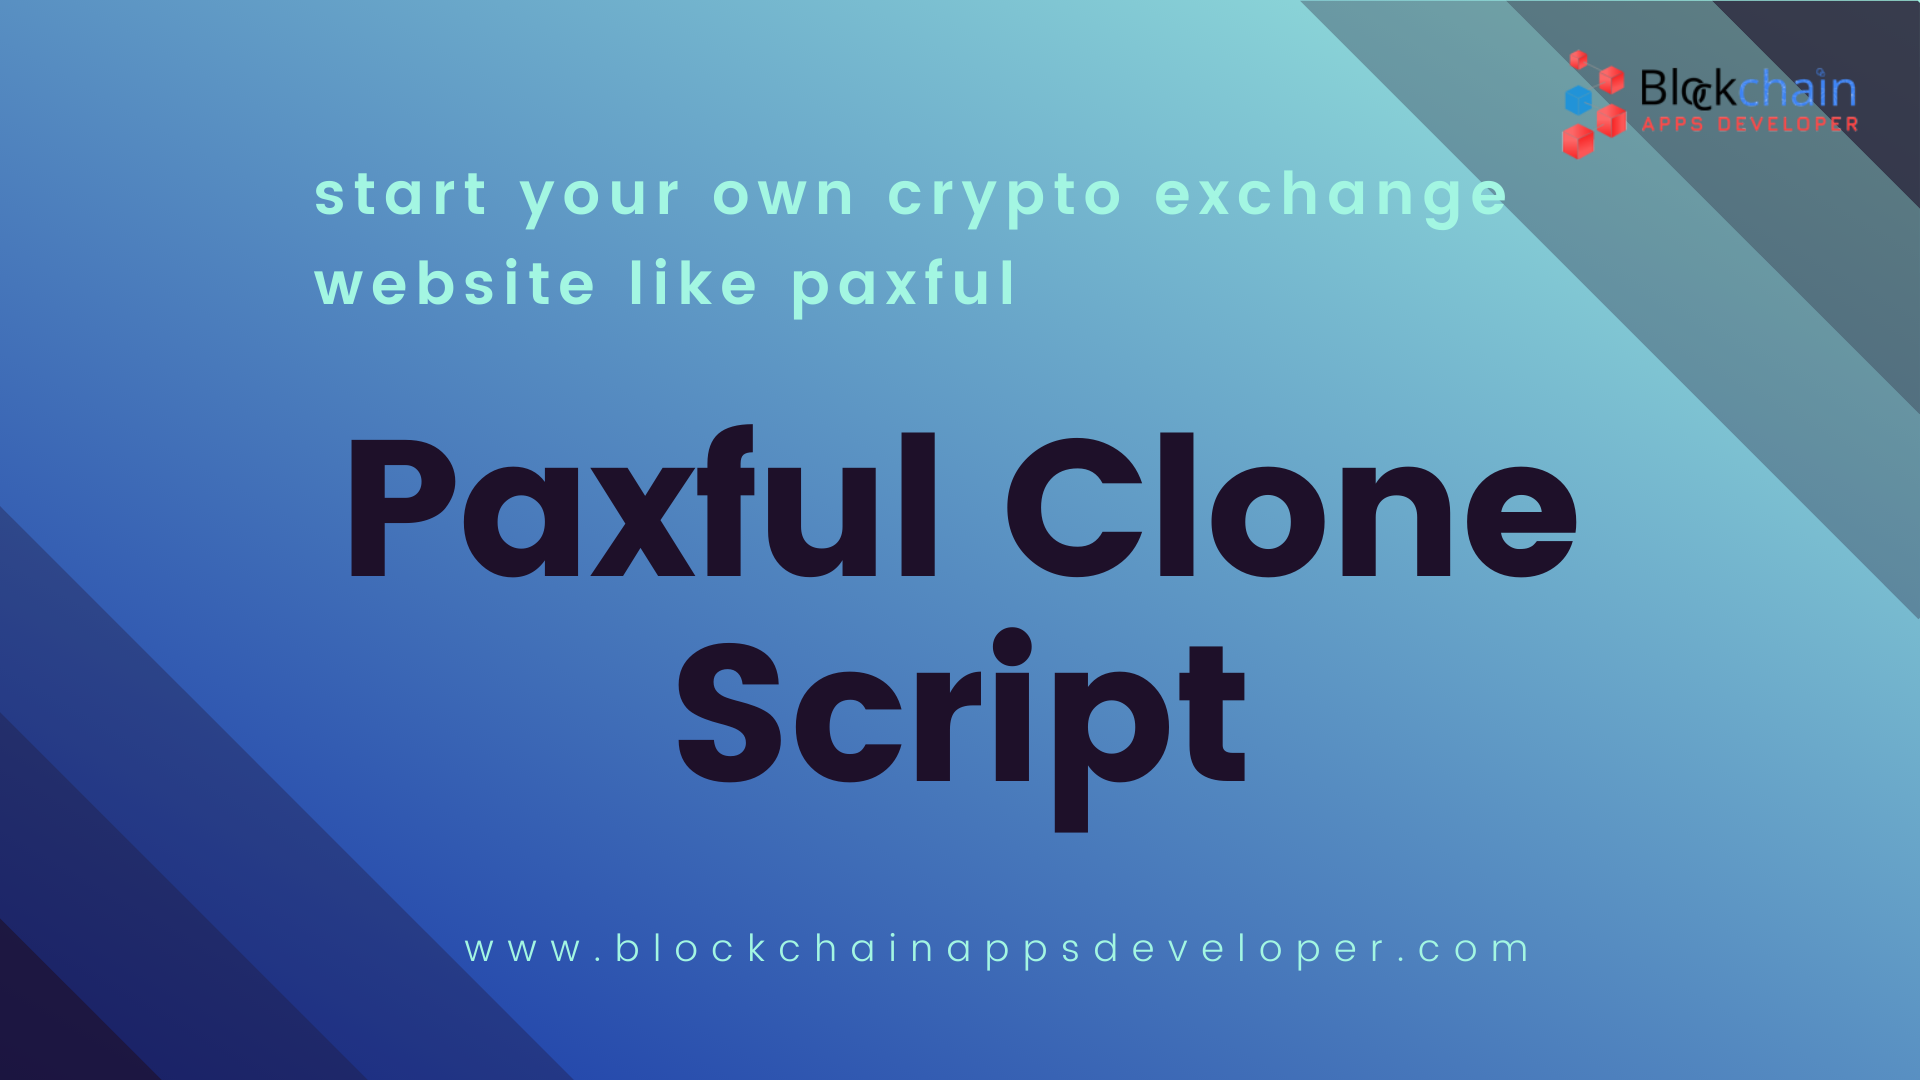 Article about Build A P2P Bitcoin Exchange Like Paxful